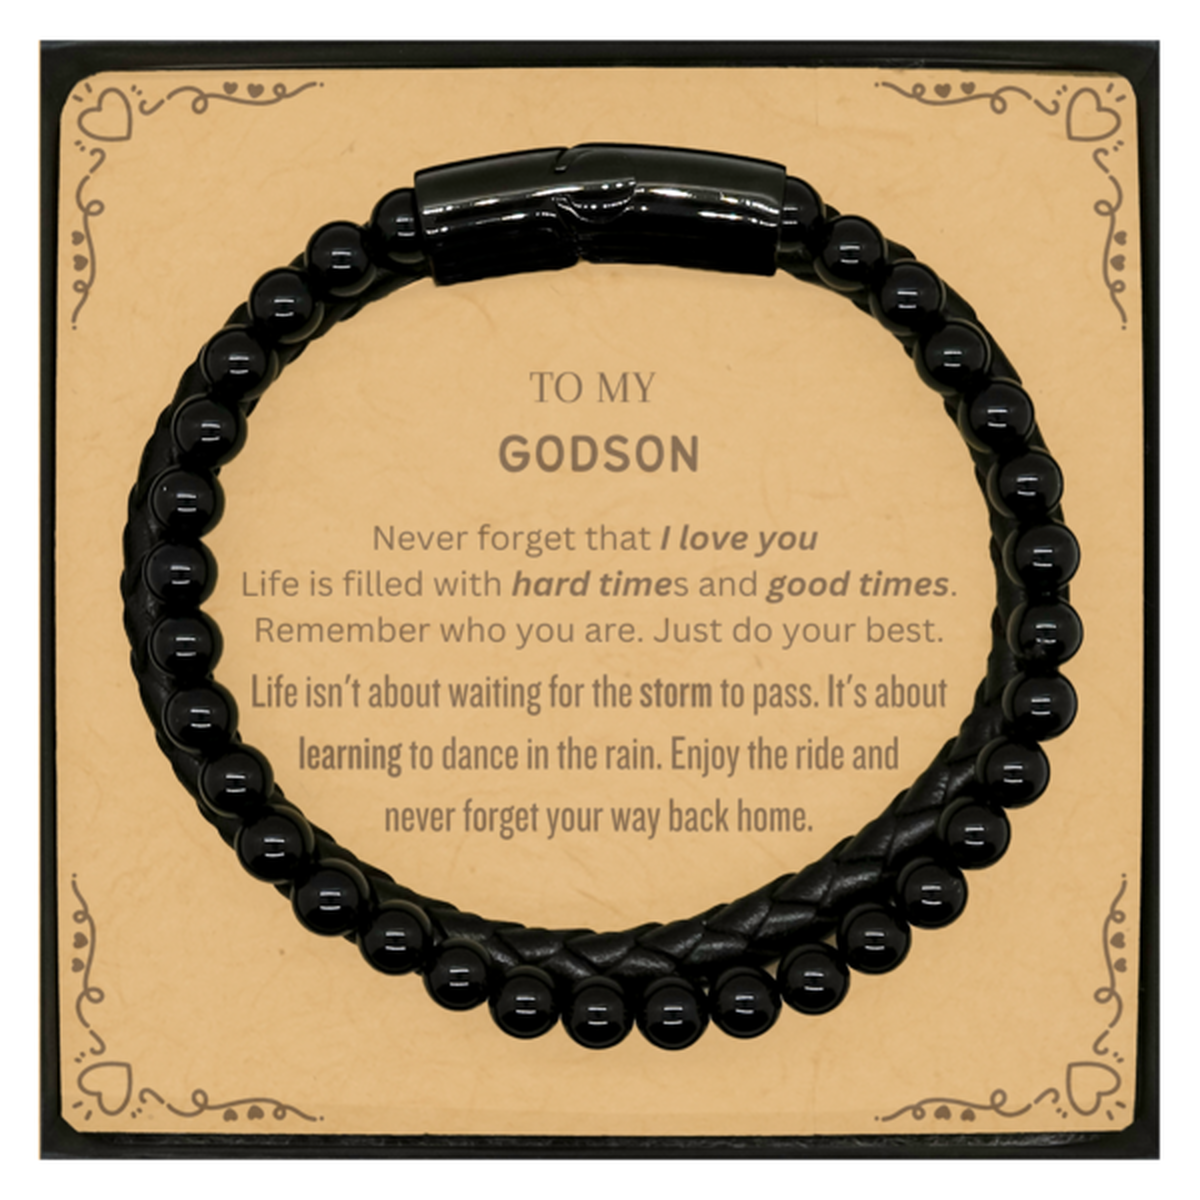 Christmas Godson Stone Leather Bracelets Gifts, To My Godson Birthday Thank You Gifts For Godson, Graduation Unique Gifts For Godson To My Godson Never forget that I love you life is filled with hard times and good times. Remember who you are. Just do you